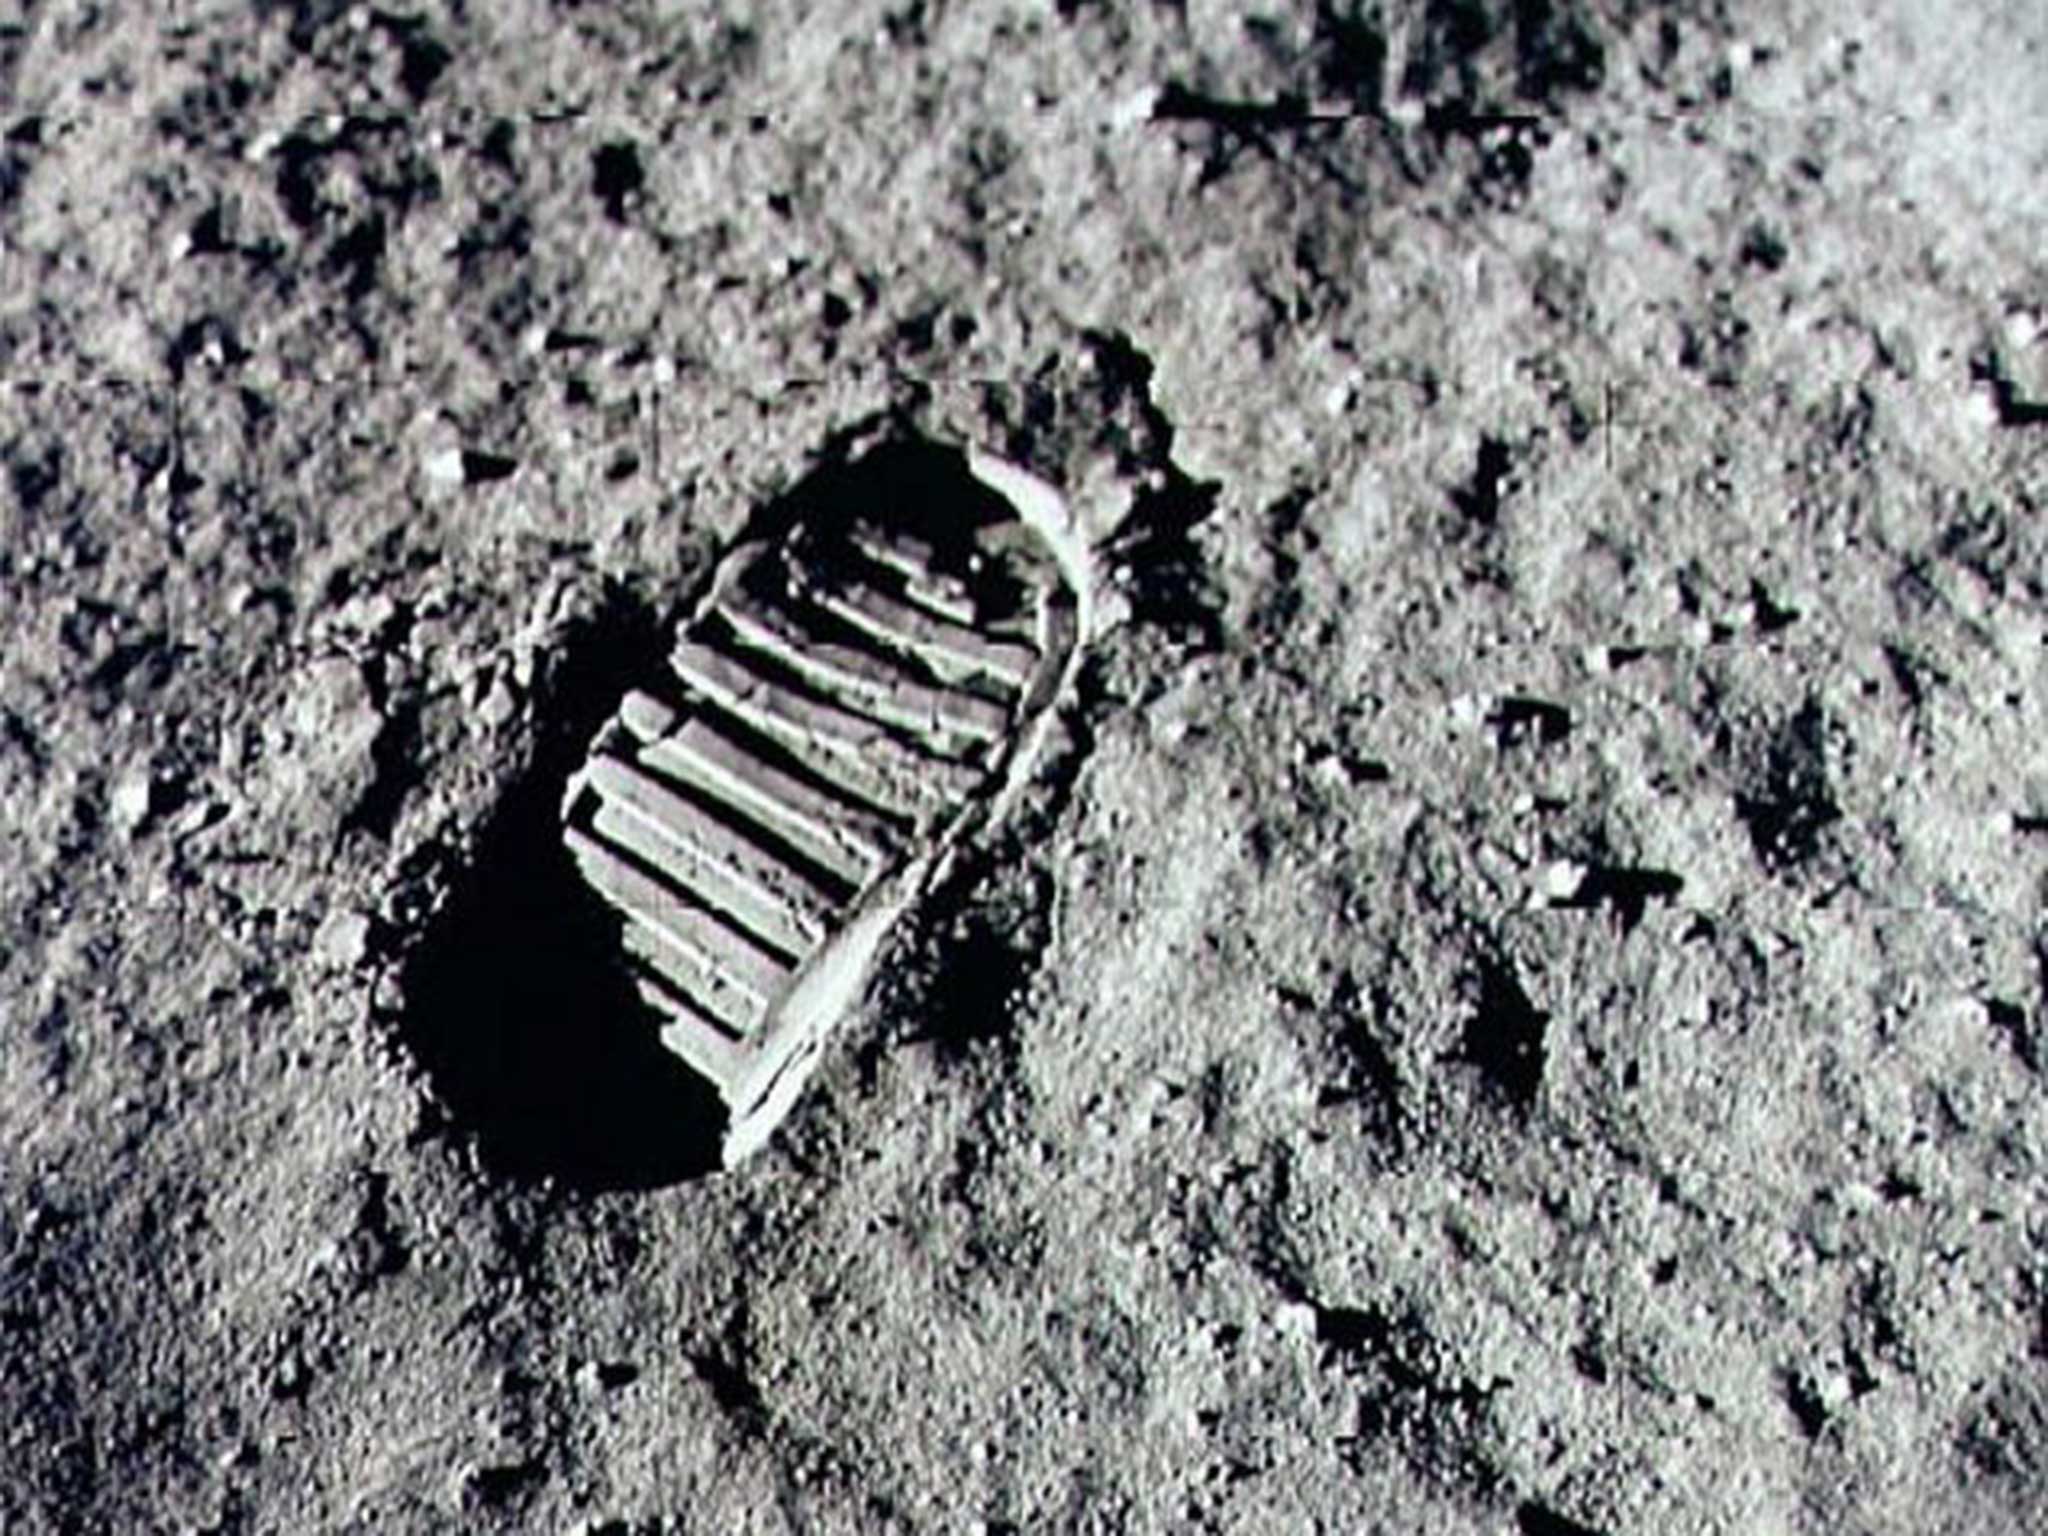 Could humans establish a permanent base on the moon?